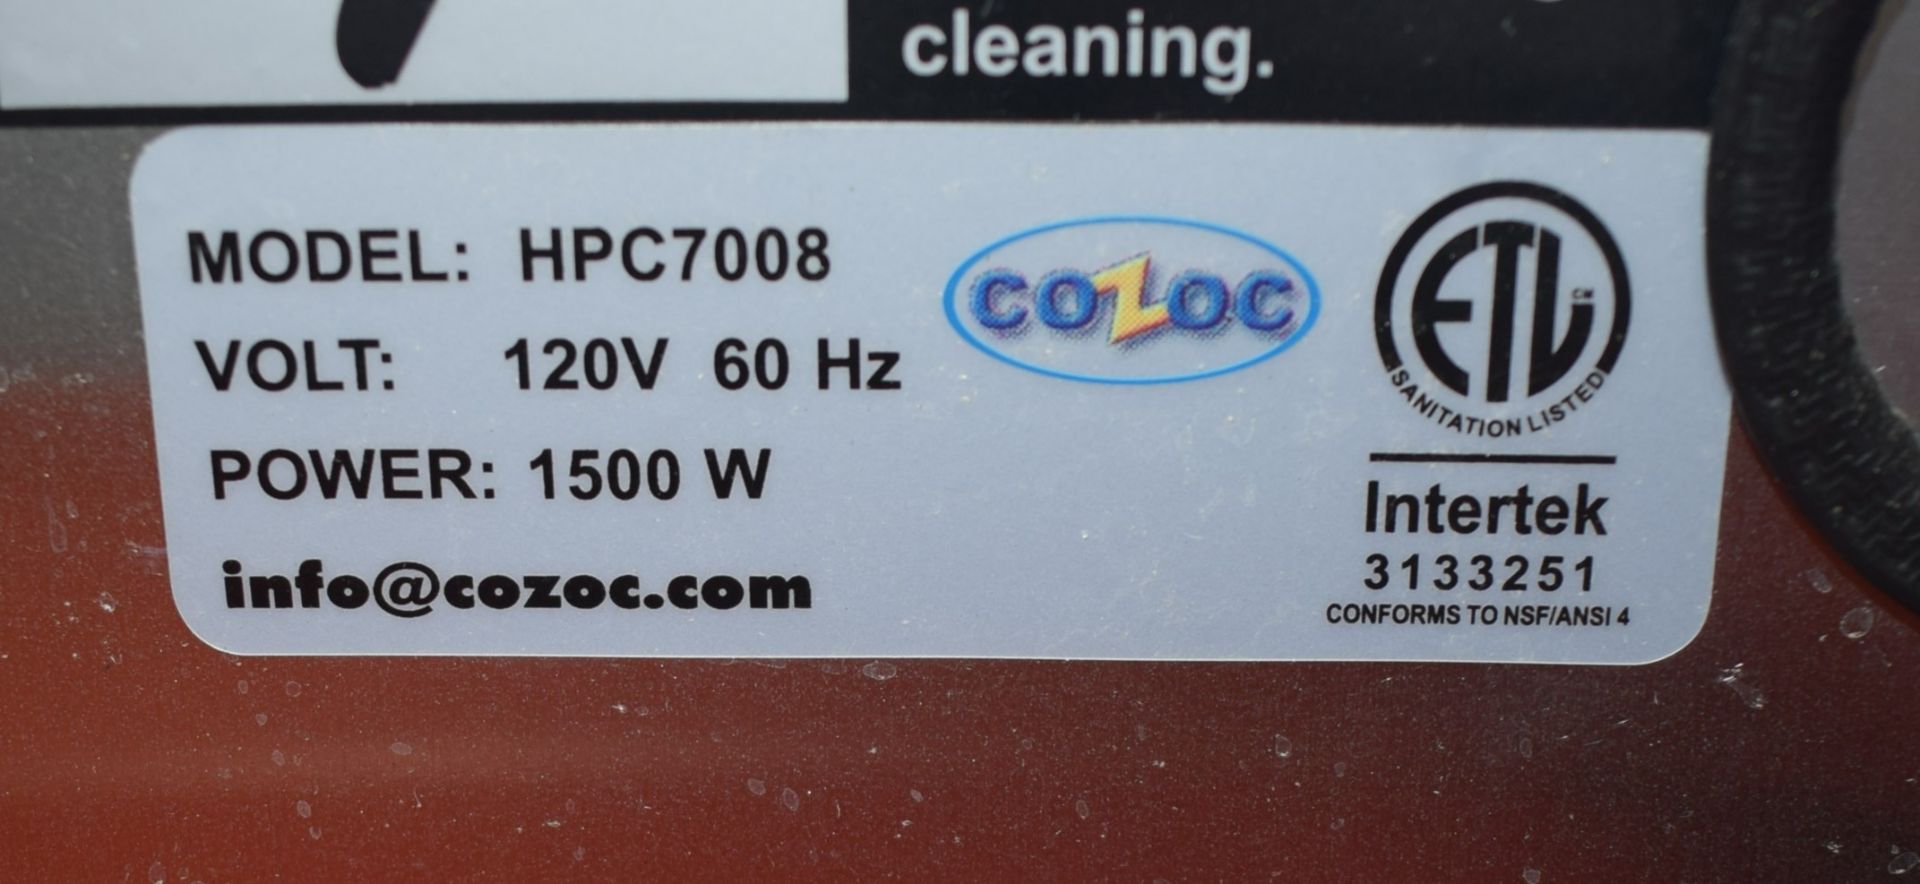 Cozoc Heated/Proofer Cabinet, Model HPC7008. Mounted on casters. - Image 5 of 5